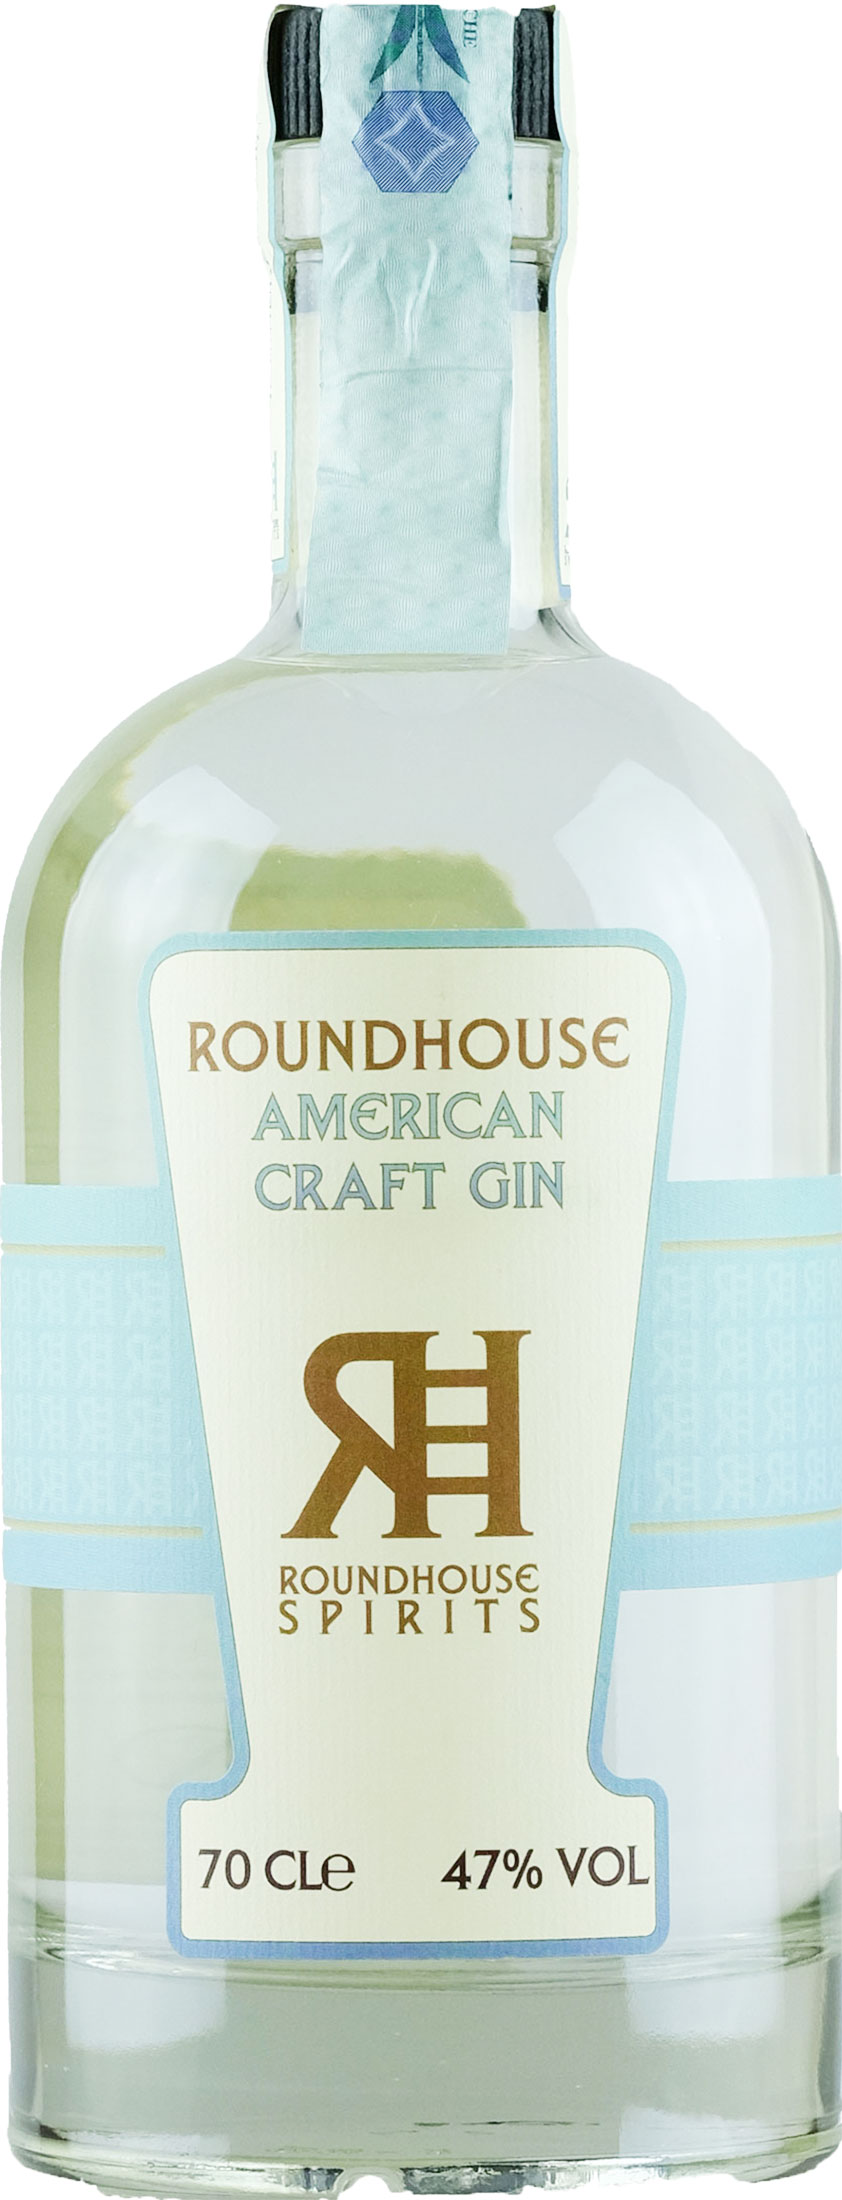 Roundhouse Gin American Craft